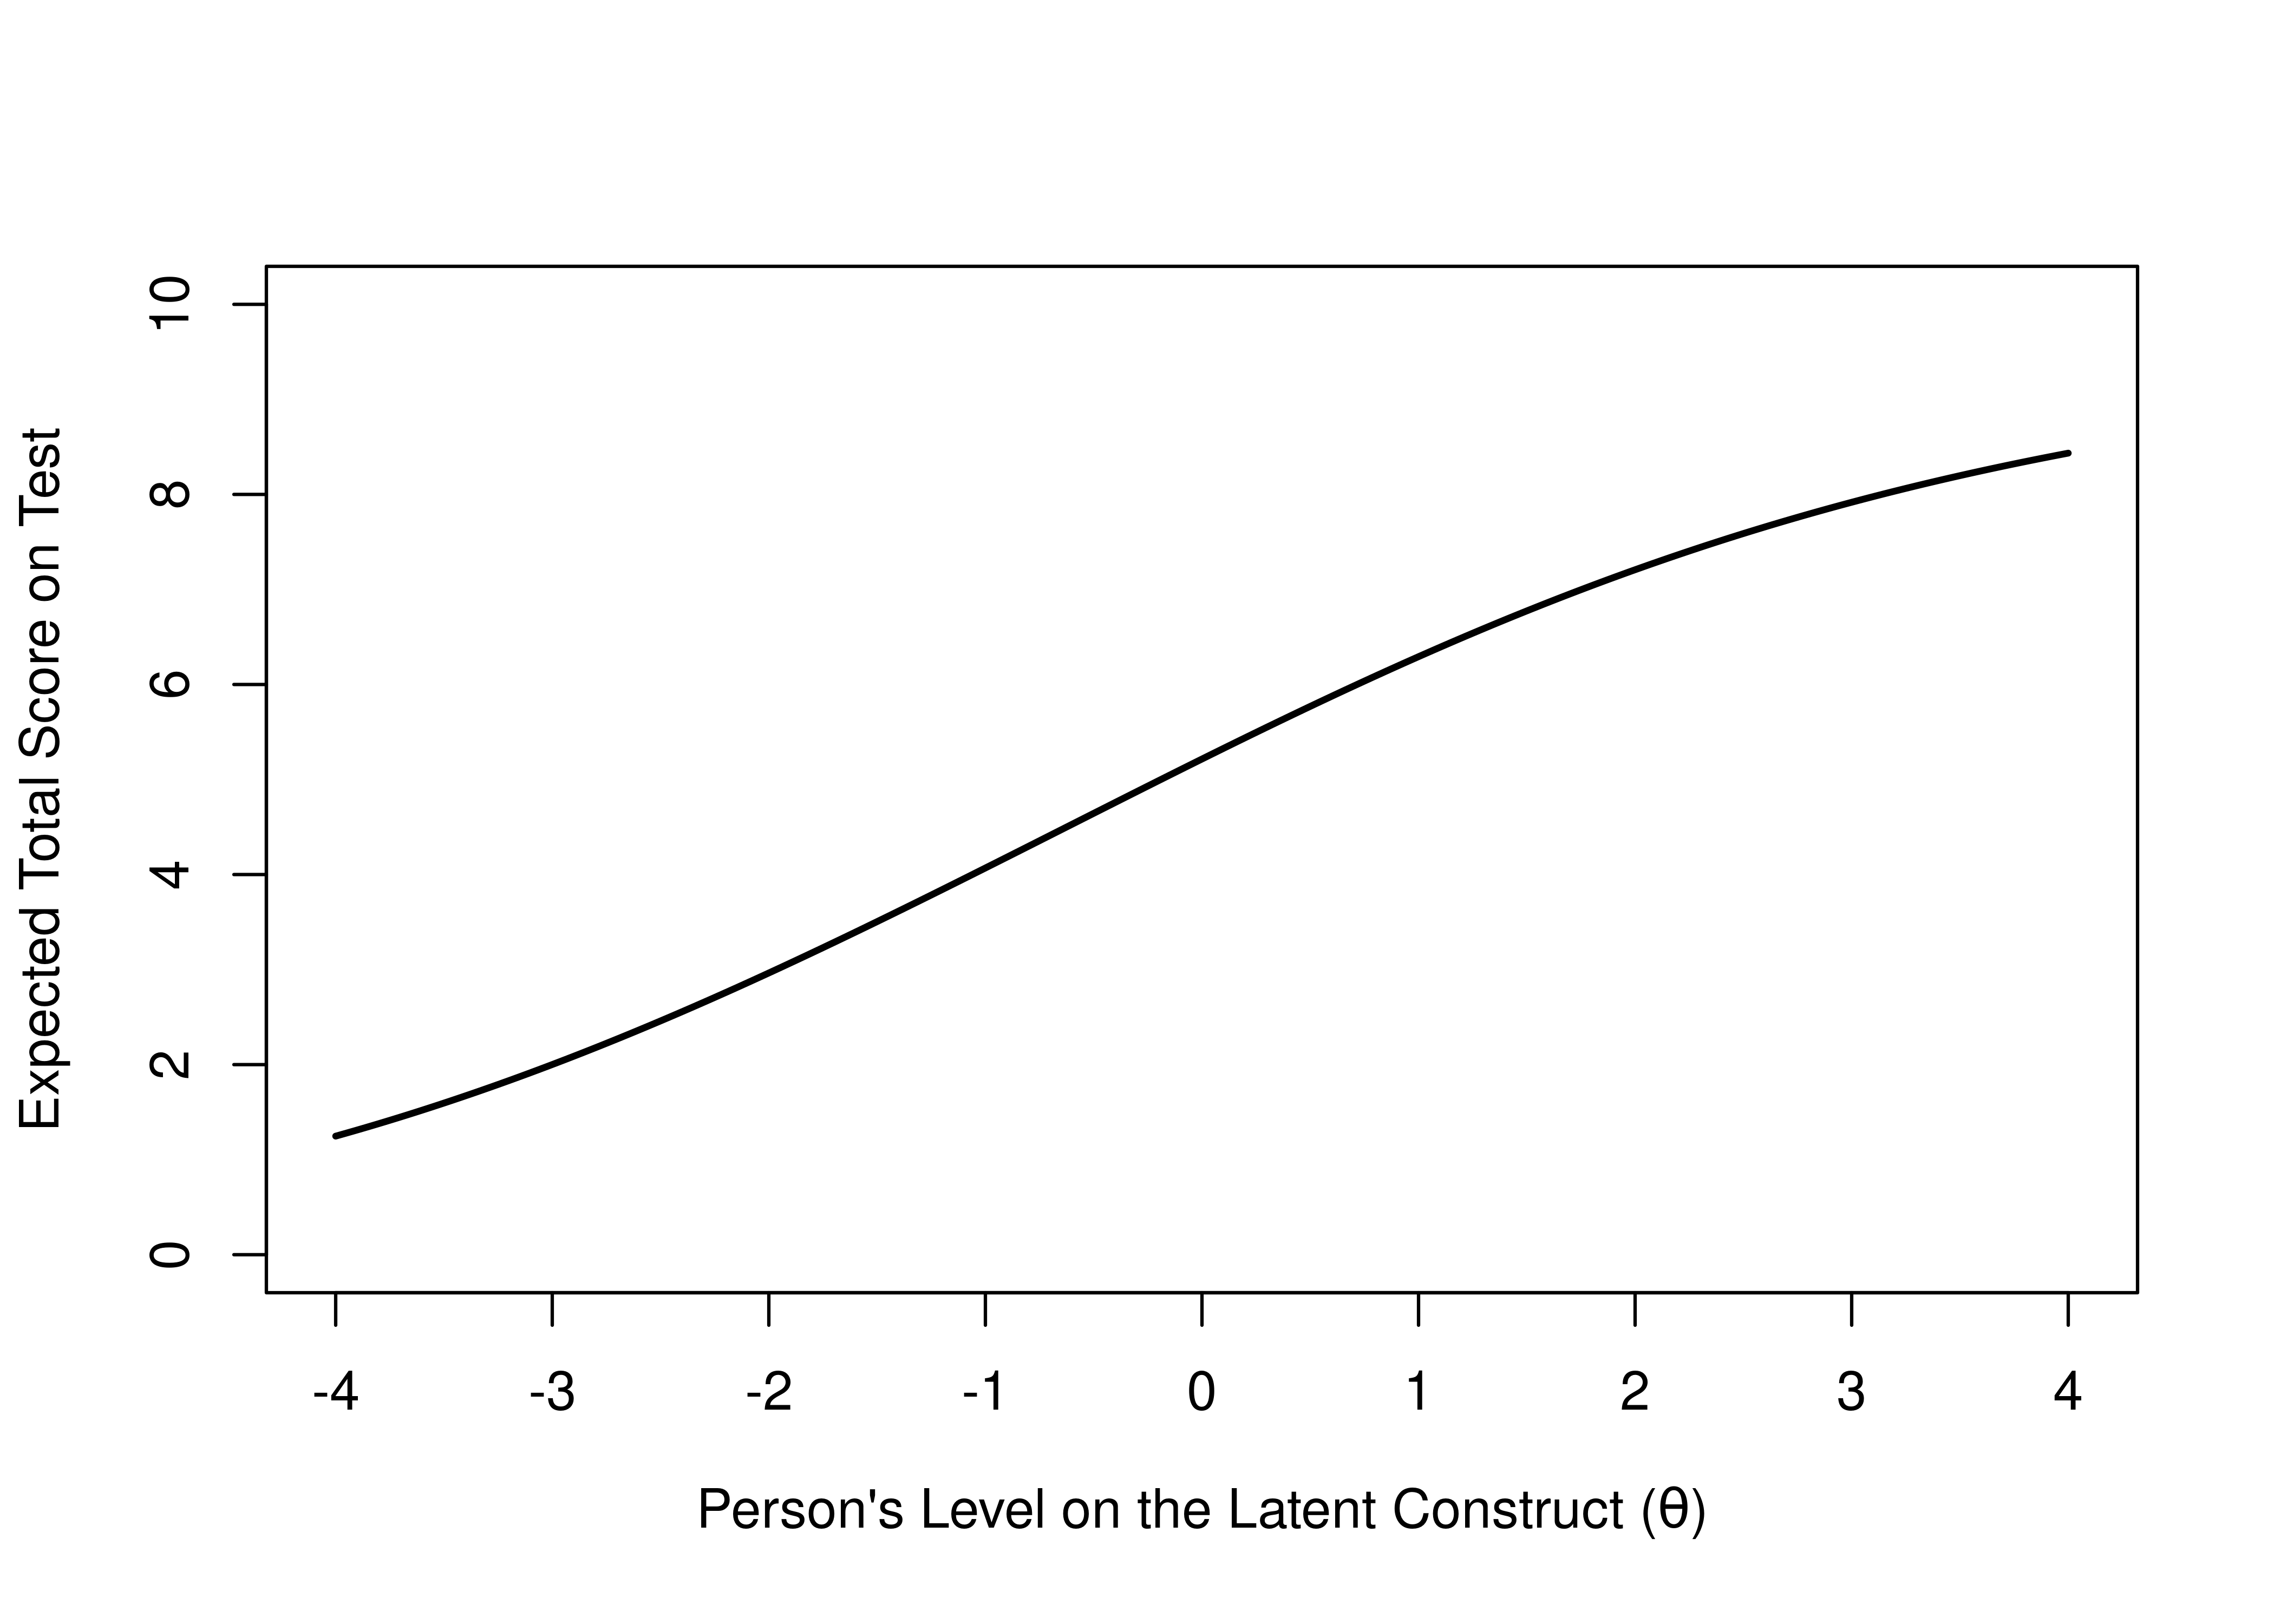 Test Characteristic Curve of the Expected Total Score on the Test as a Function of the Person's Level on the Latent Construct.